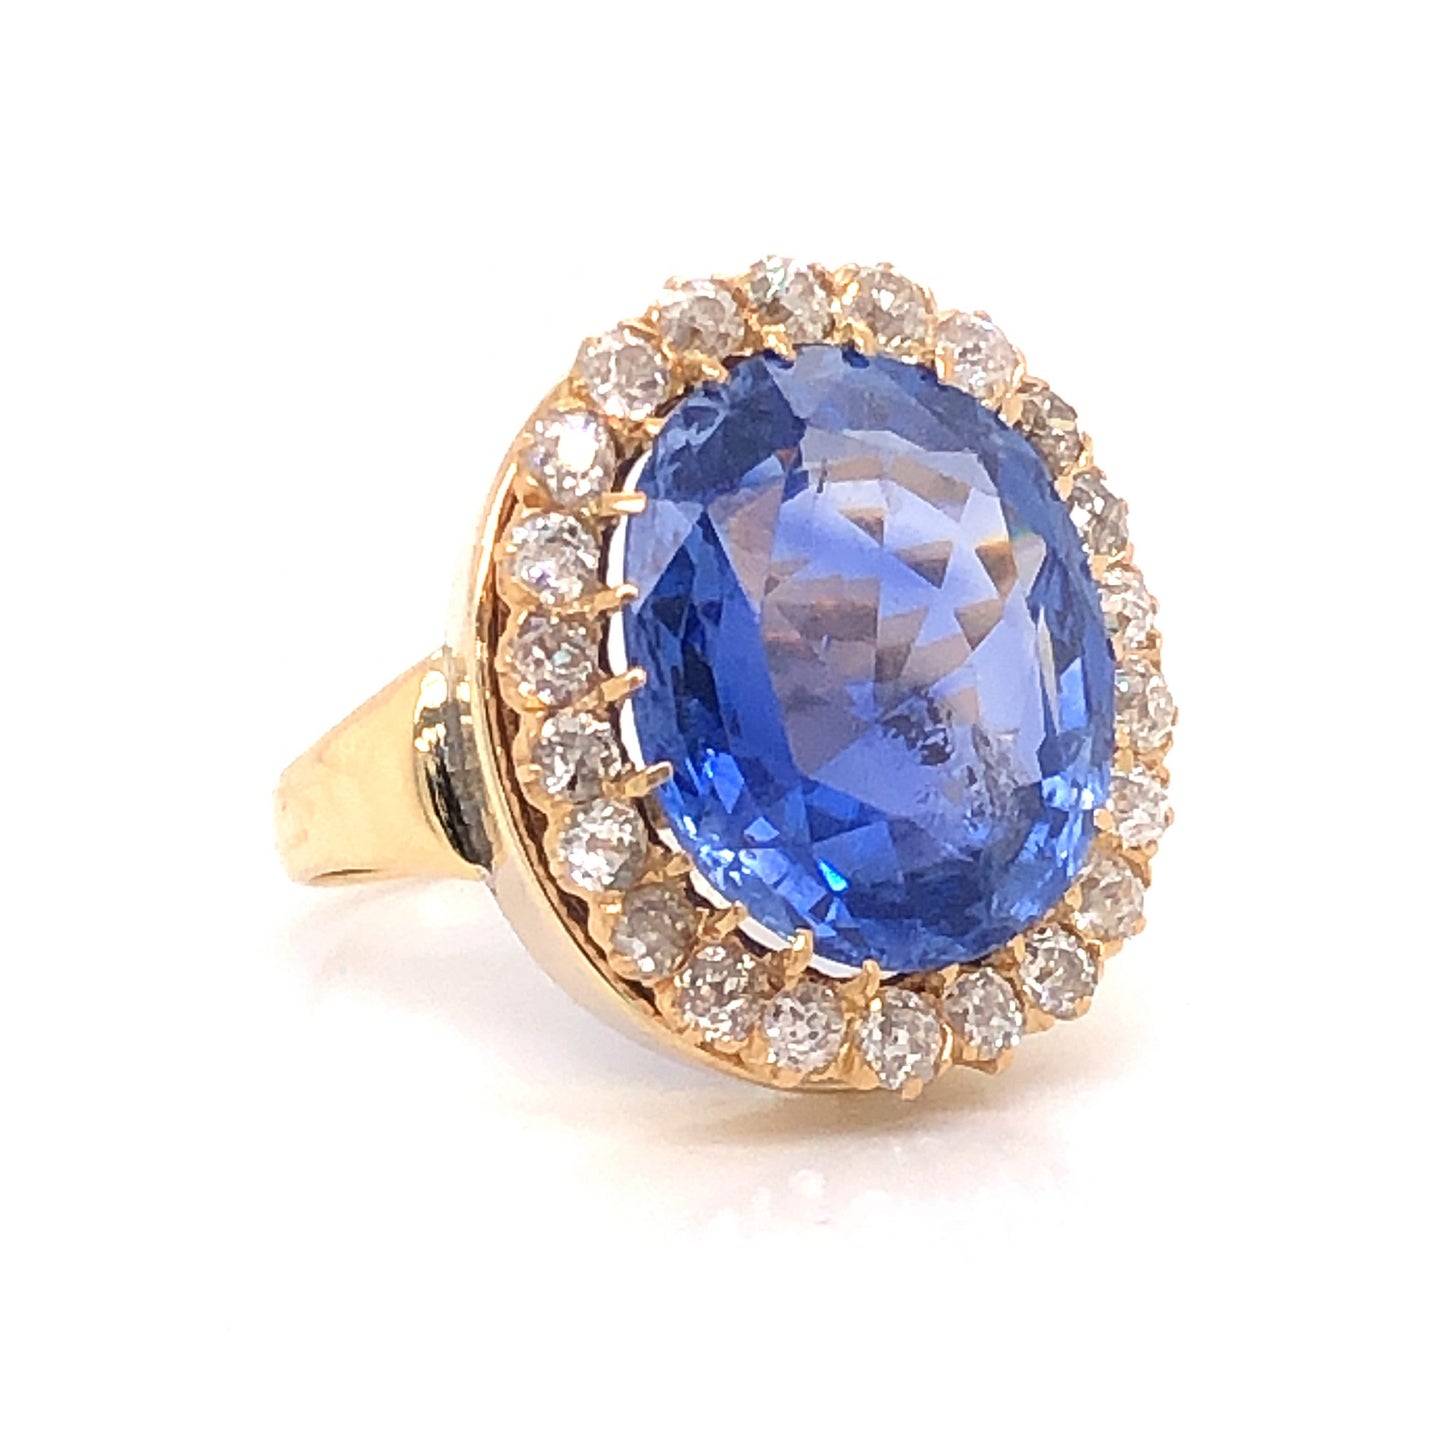 9.62 Victorian Blue Spinel & Diamond Cocktail Ring in 14k